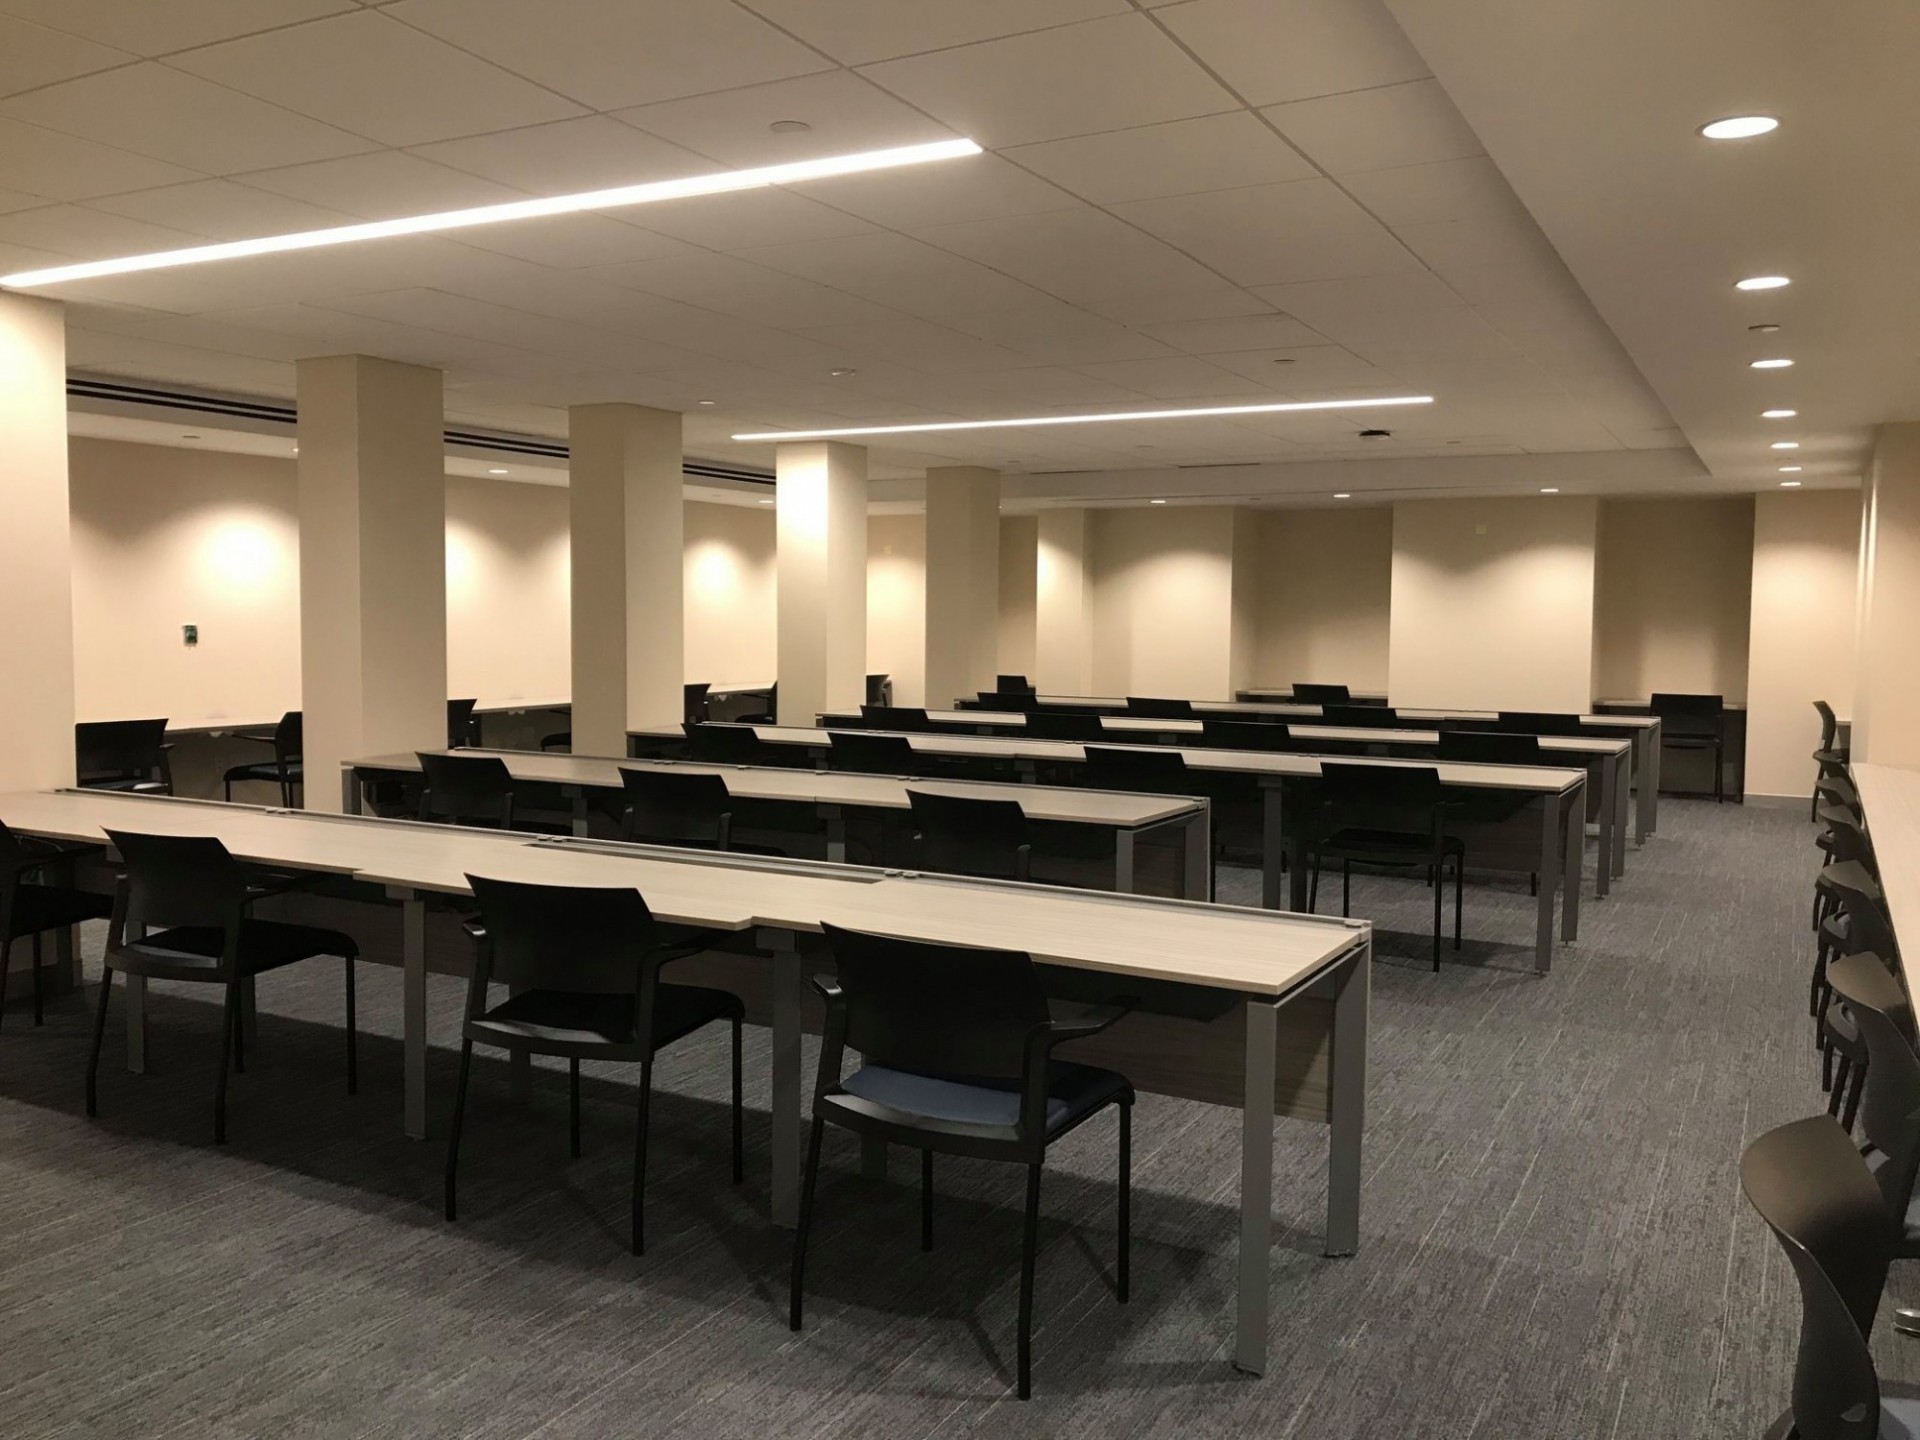 Room full of desks and chairs